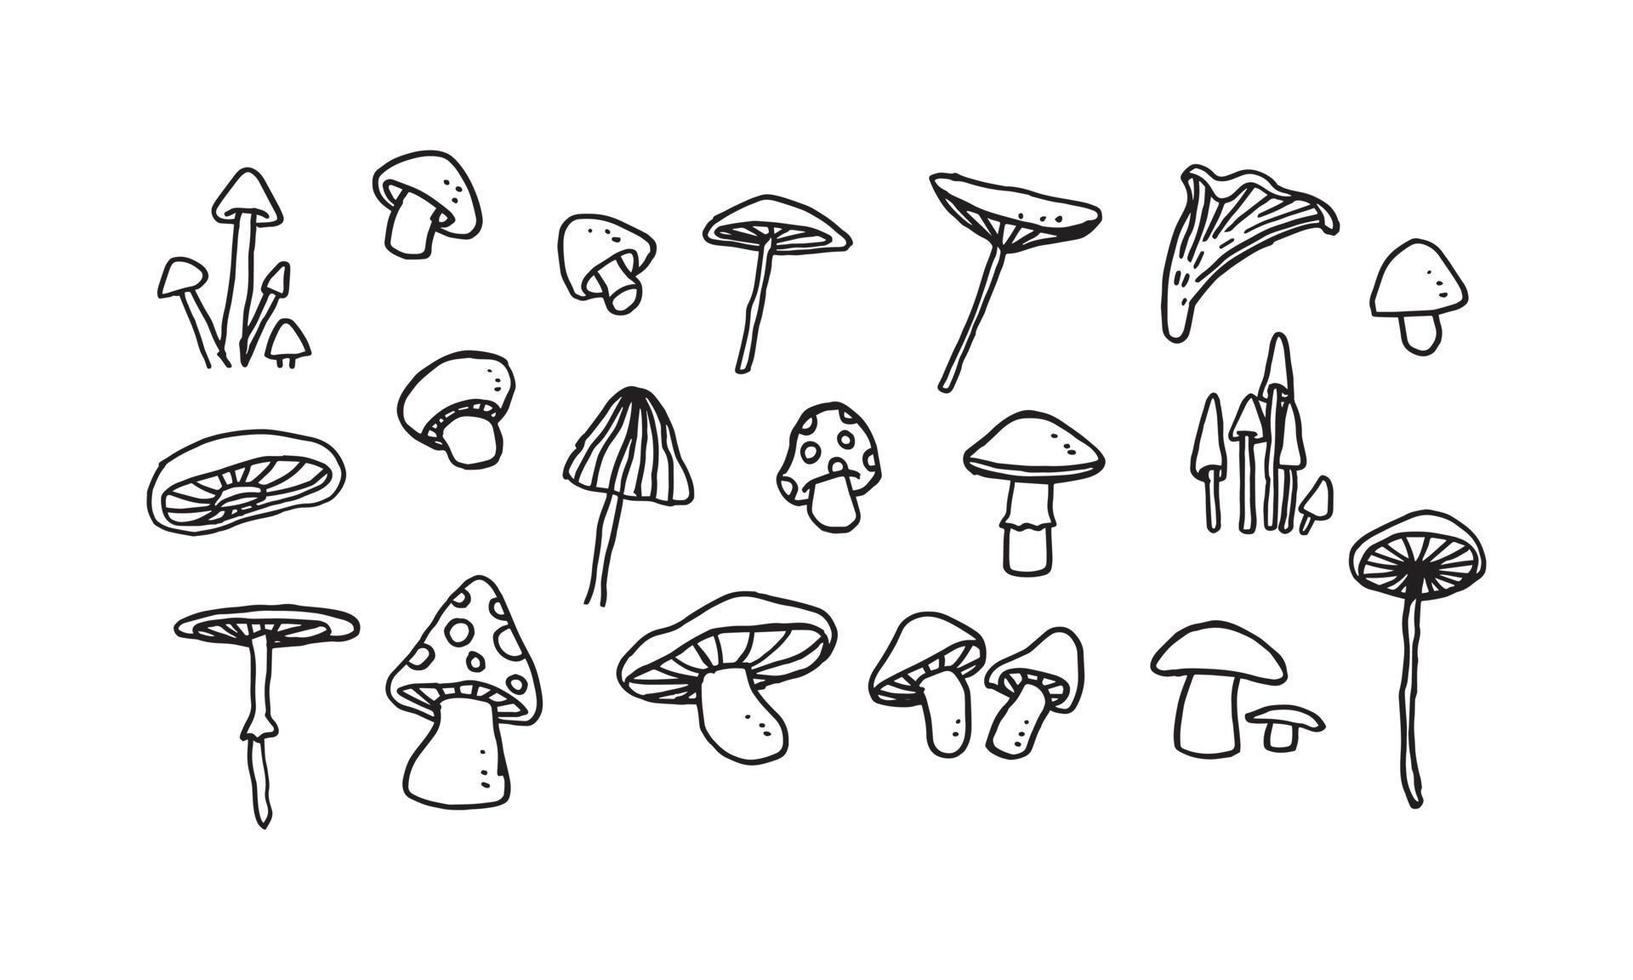 set of hand drawn illustration of fungus. simple and minimal vector design for element decoration. pencil sketch drawing in graphic.